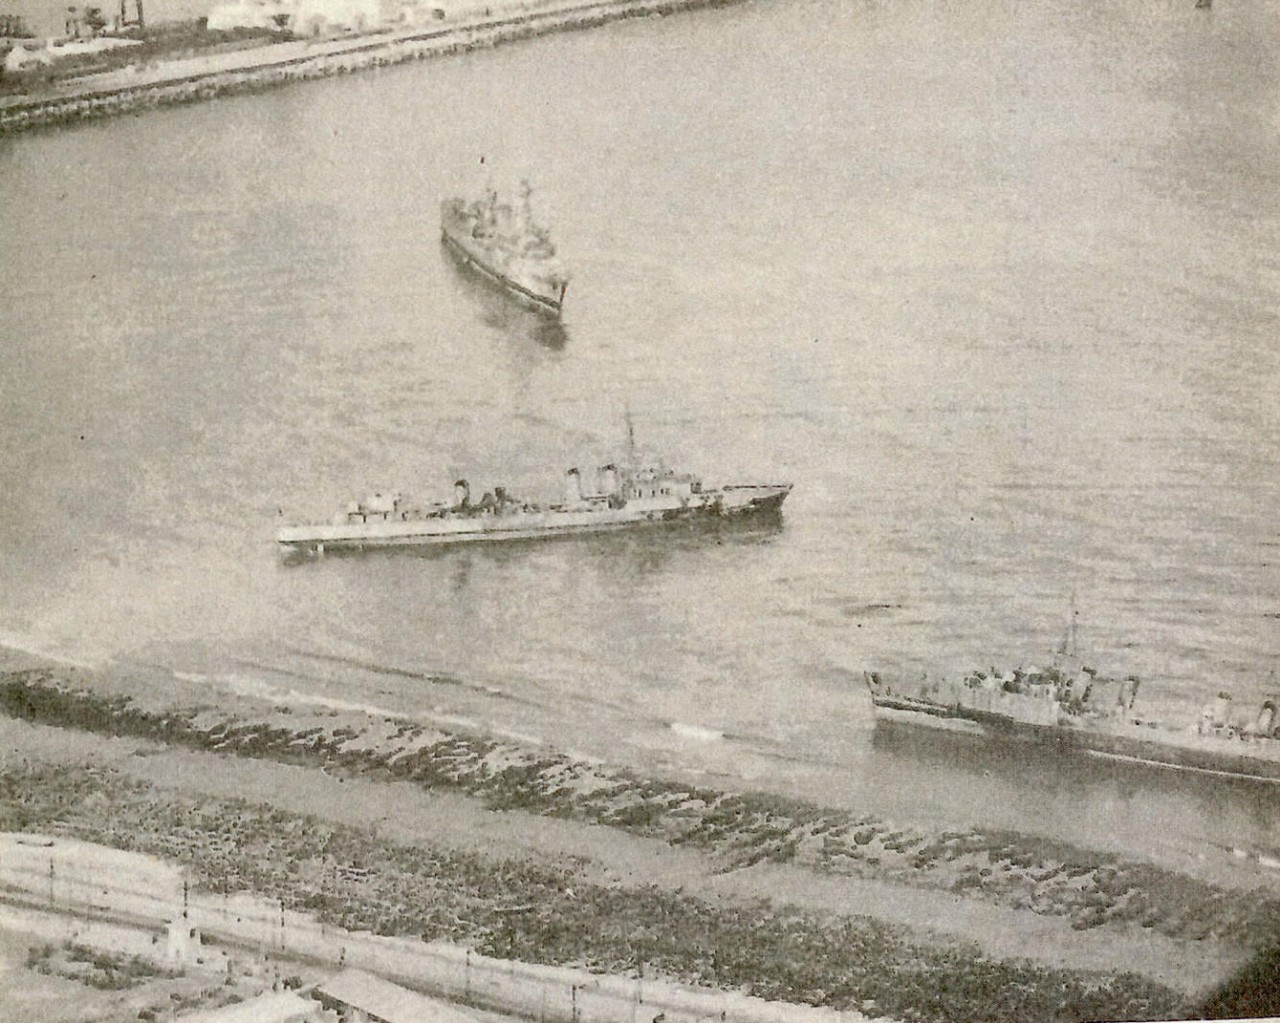 The Primauguet, Albatros, and Milan beached outside Casablanca